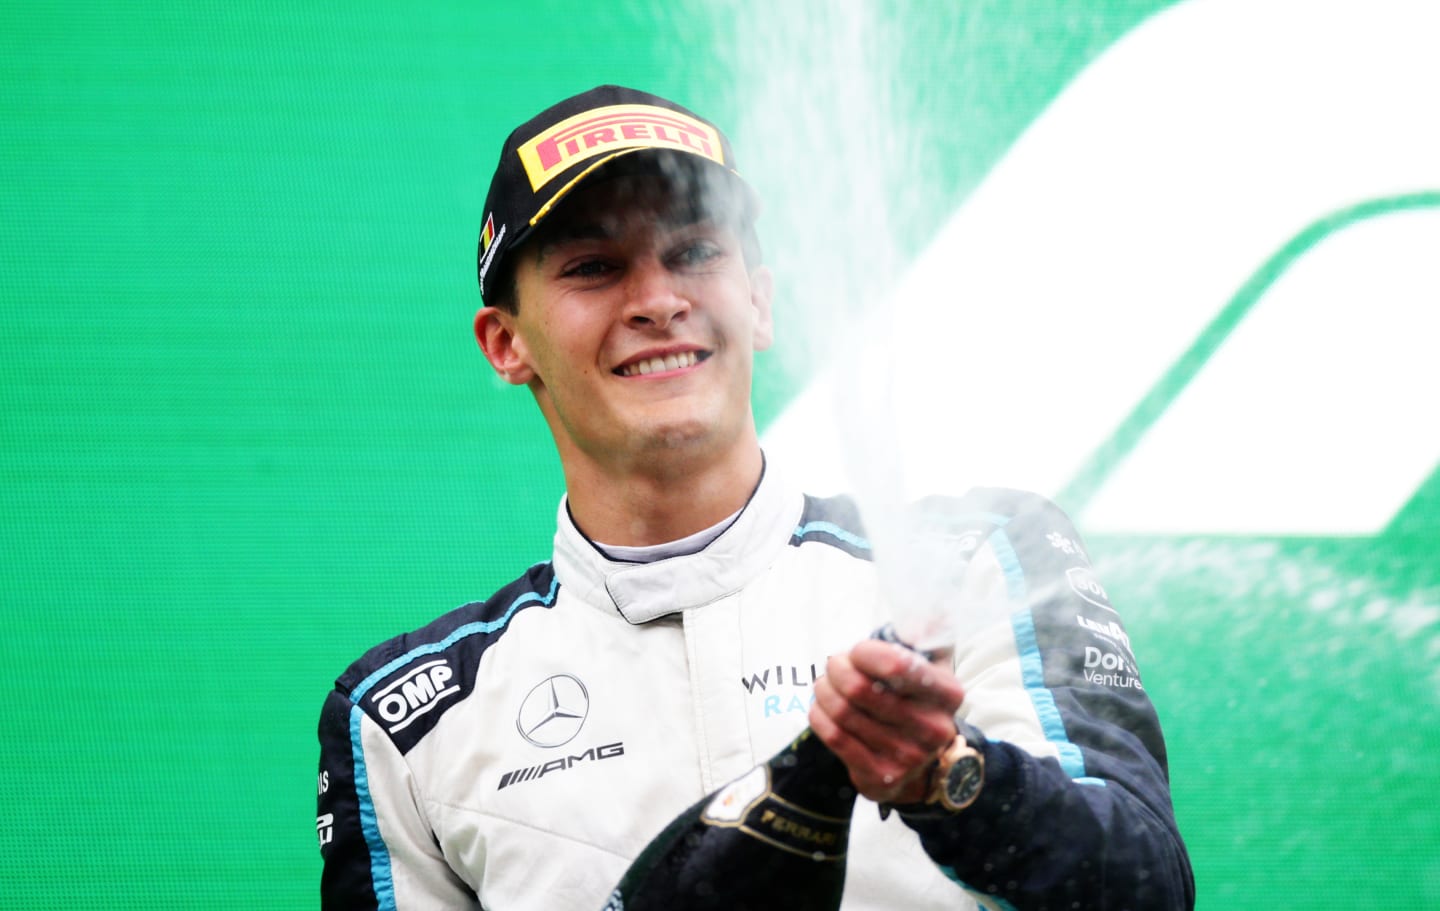 SPA, BELGIUM - AUGUST 29: Second placed George Russell of Great Britain and Williams celebrates on the podium during the F1 Grand Prix of Belgium at Circuit de Spa-Francorchamps on August 29, 2021 in Spa, Belgium. (Photo by Peter Fox/Getty Images)